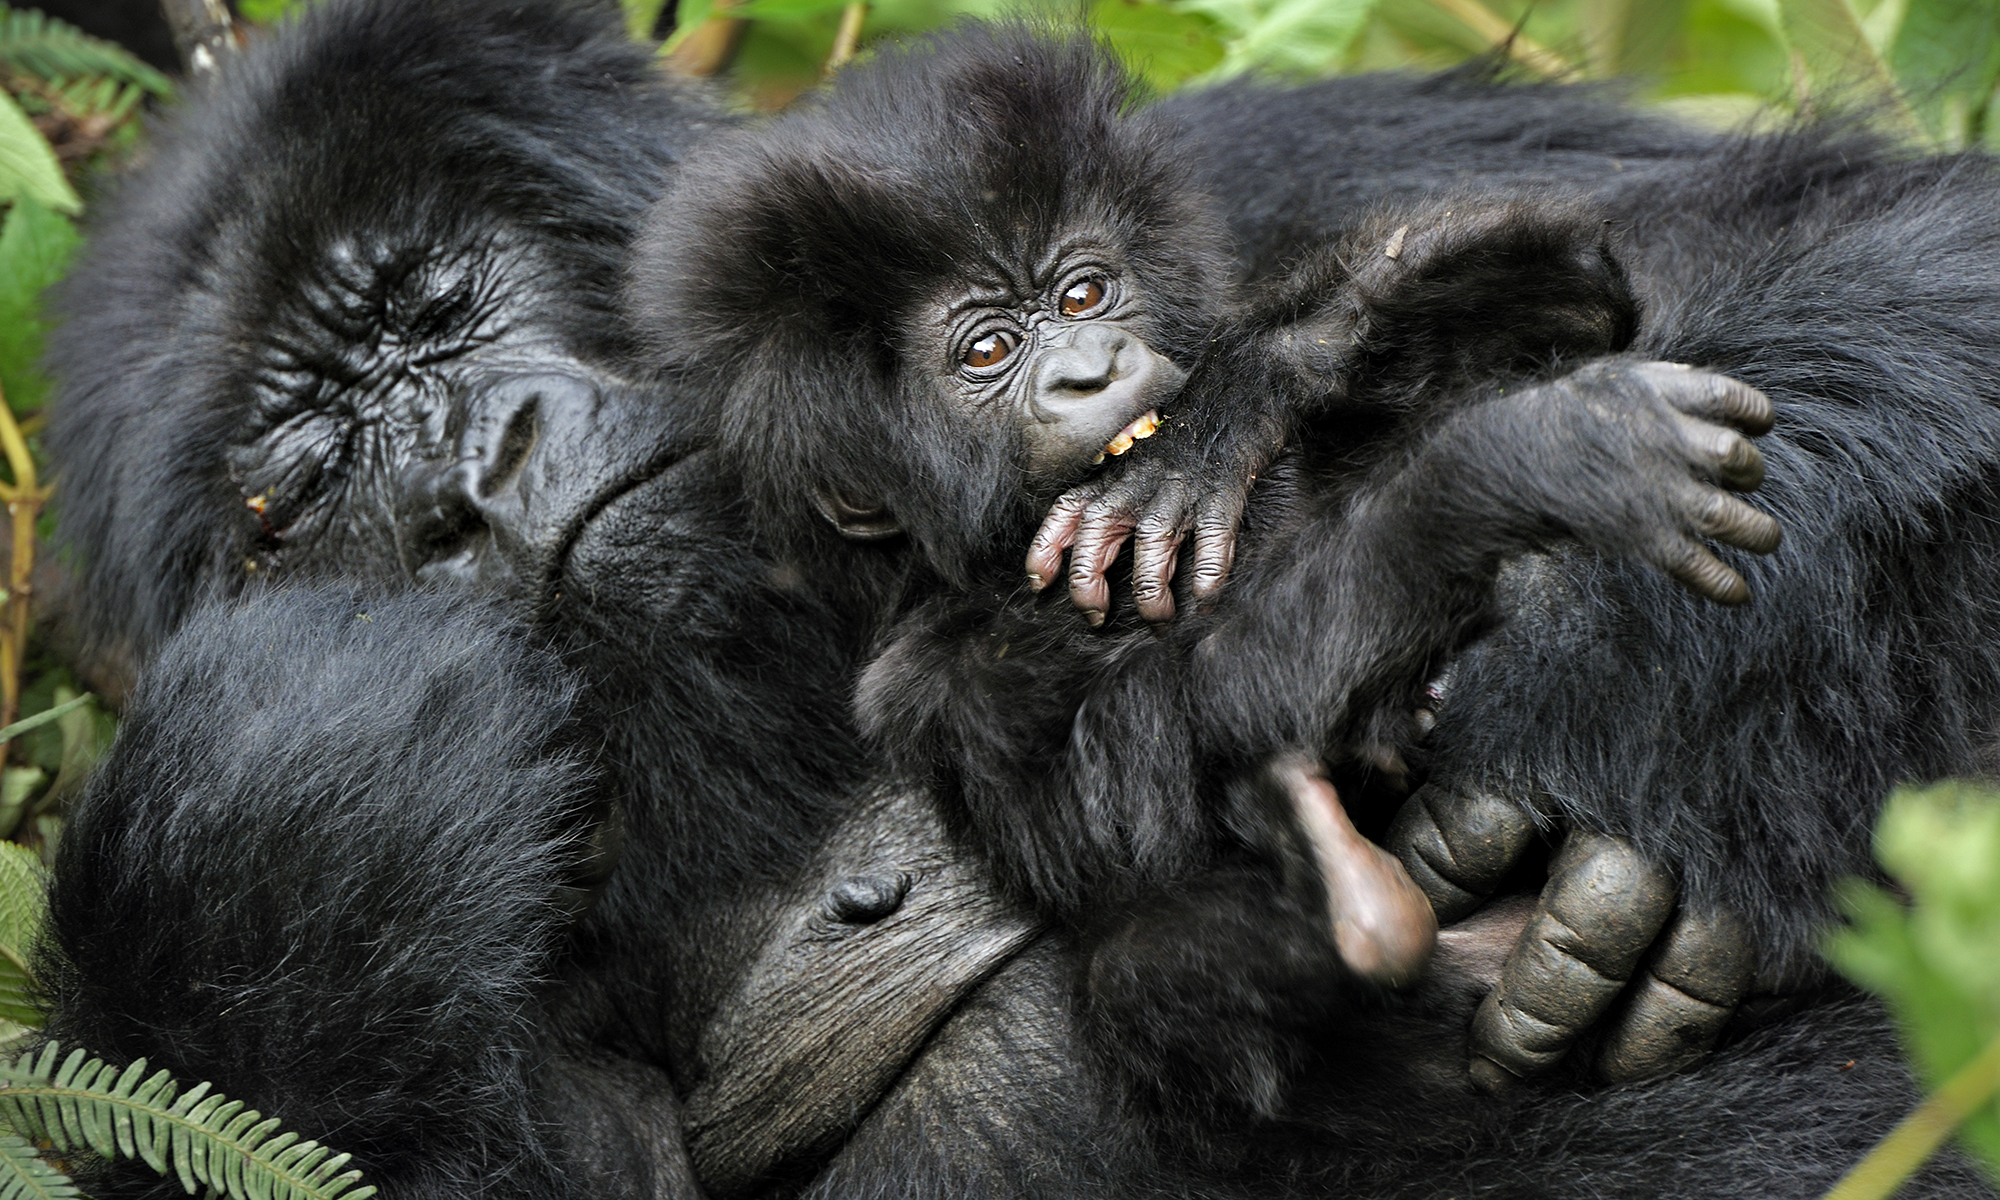 Why do gorillas build new nests every night? | HowStuffWorks